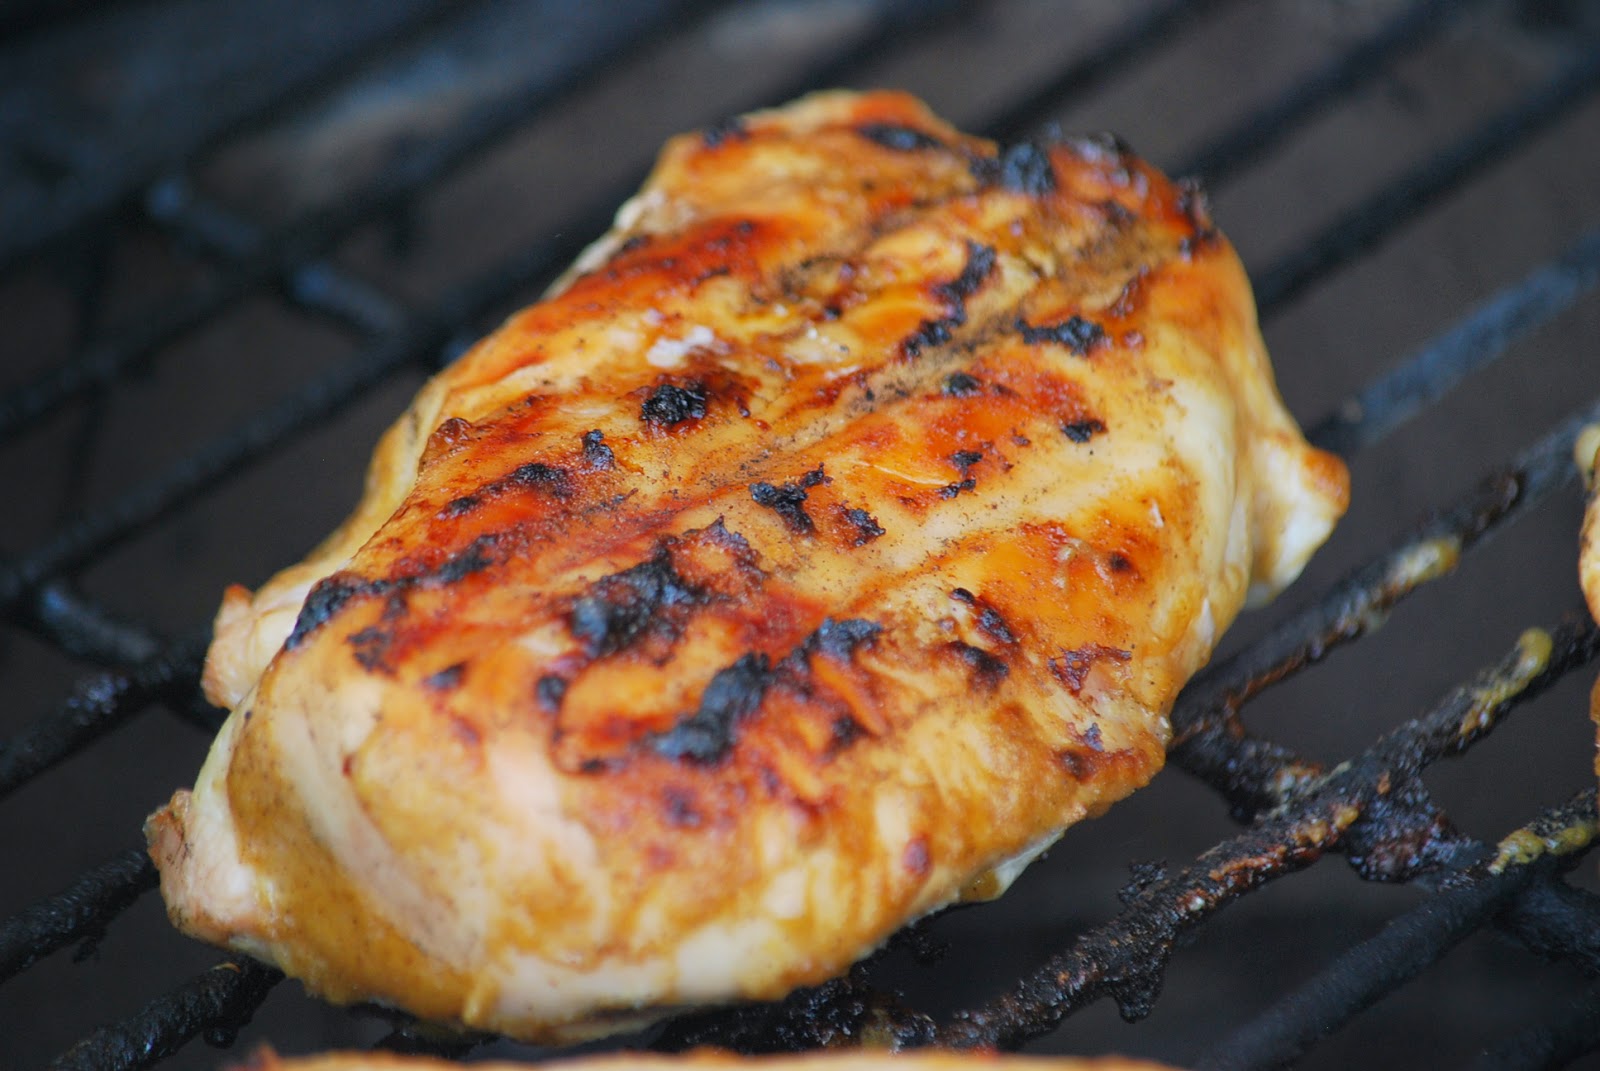 My story in recipes: Grilled Brown Sugar Mustard Chicken